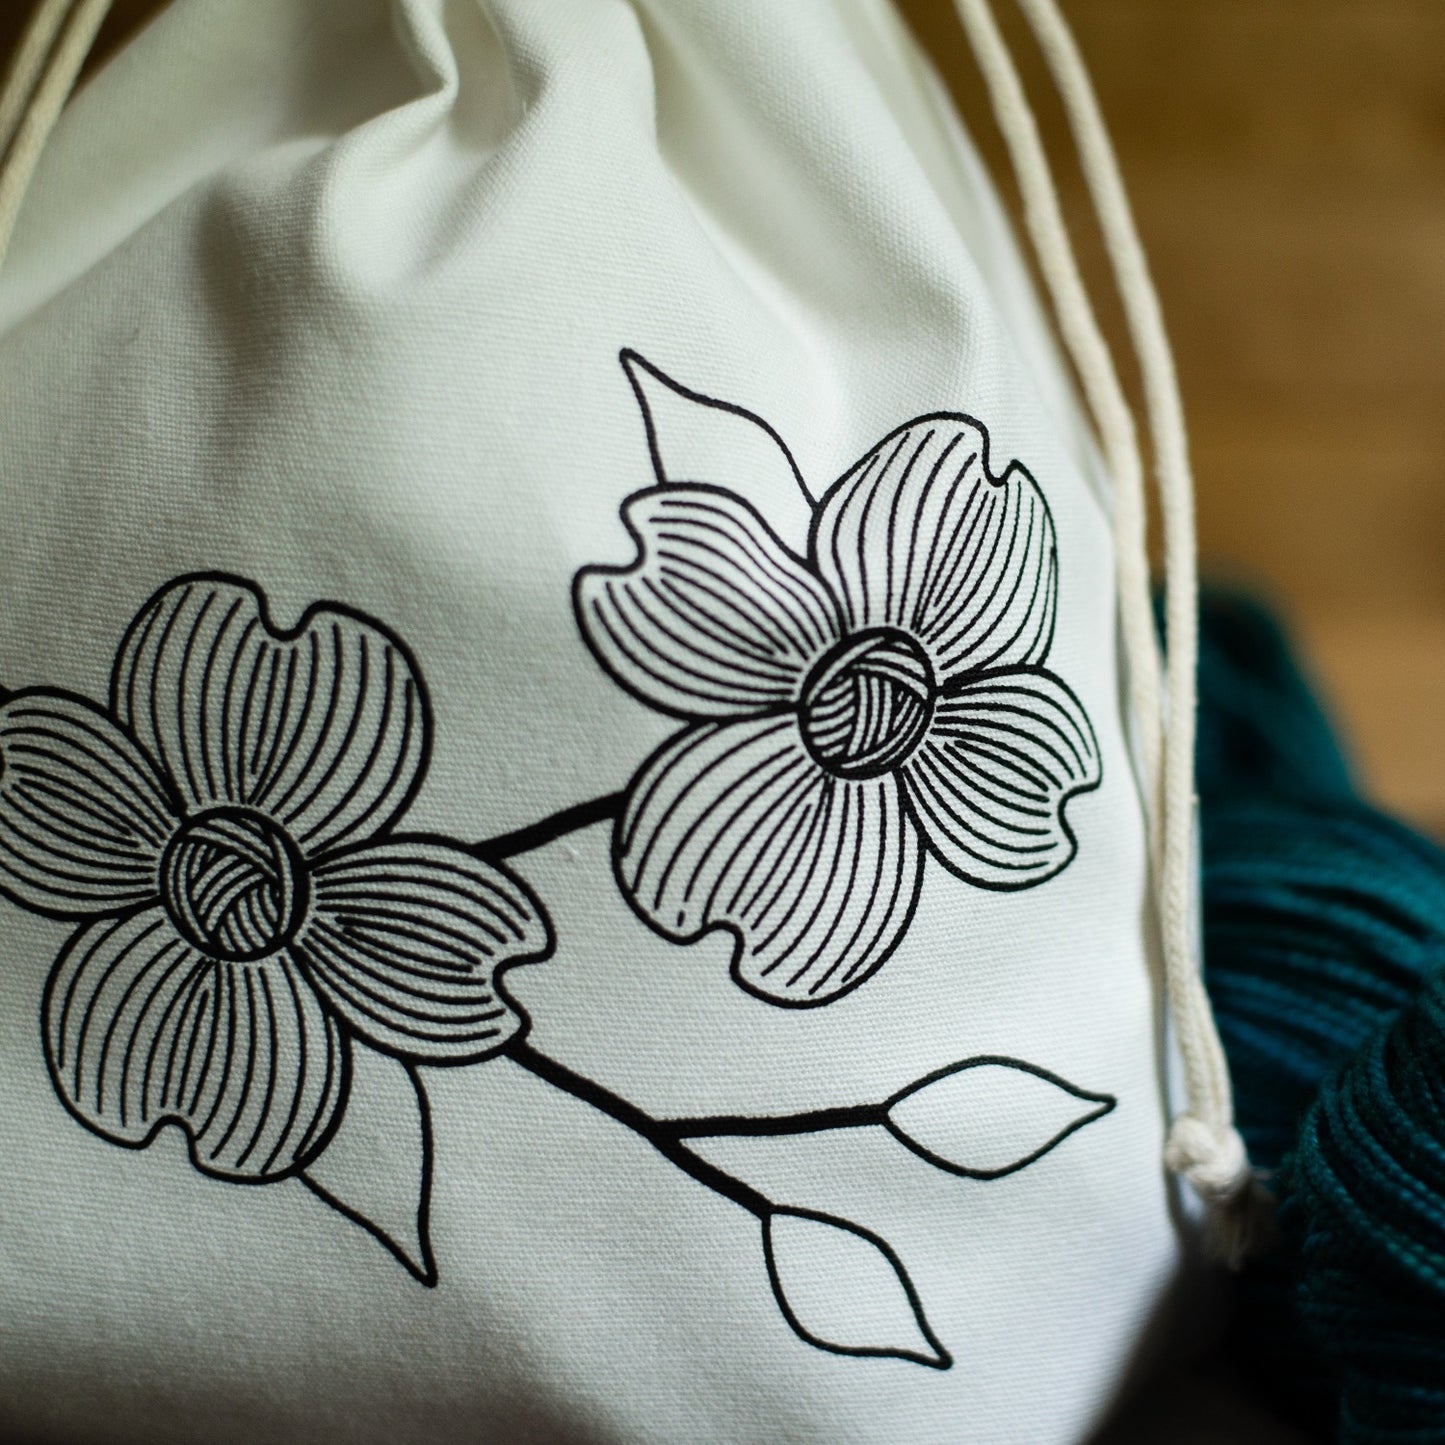 Dogwood Branch Small Cotton Project Bag